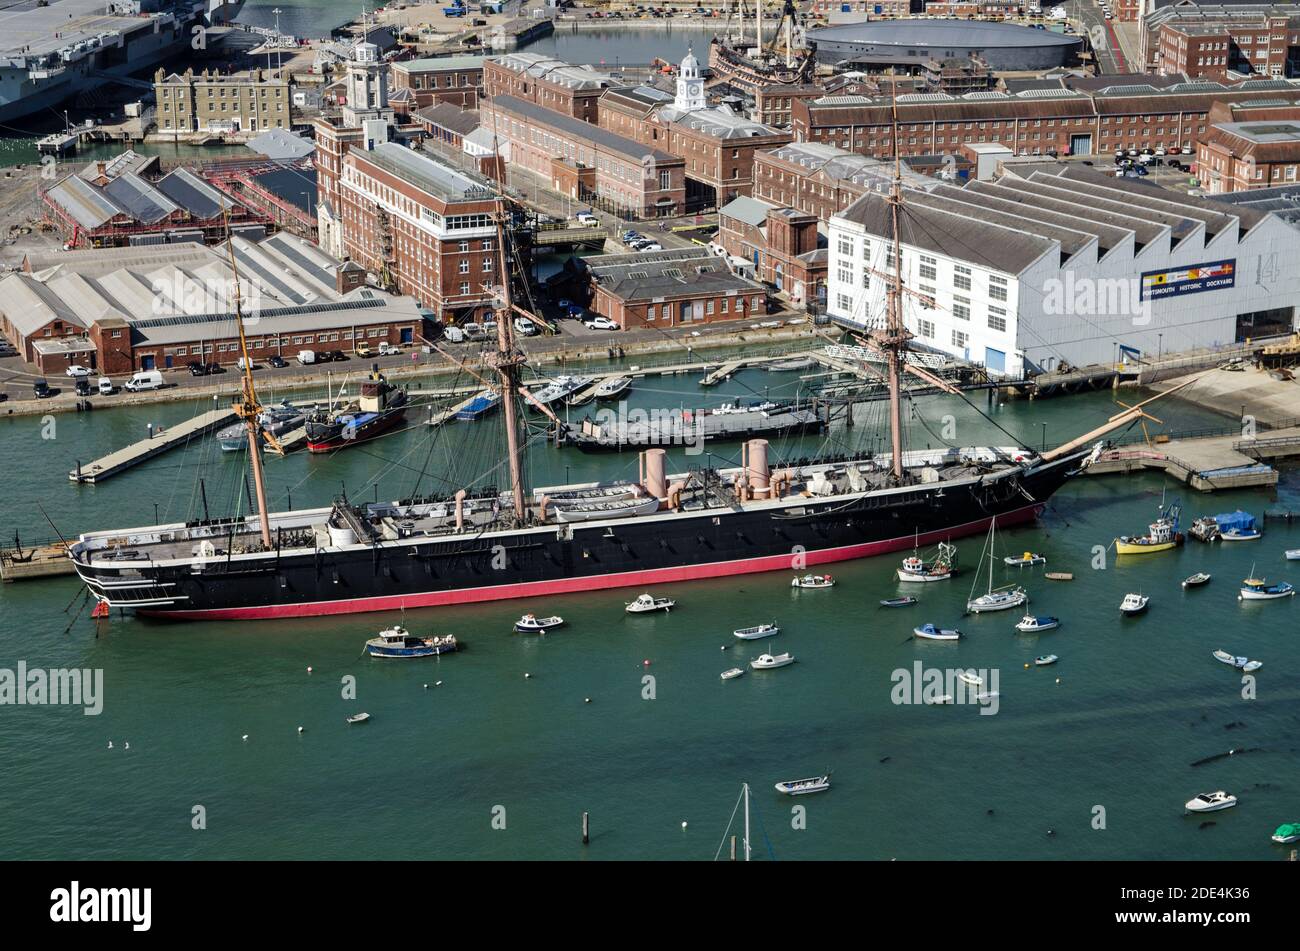 View from a high position looking down on HMS Warrior, the first iron hulled warship in the Royal Navy, on display in Portsmouth Historic Dockyard on Stock Photo